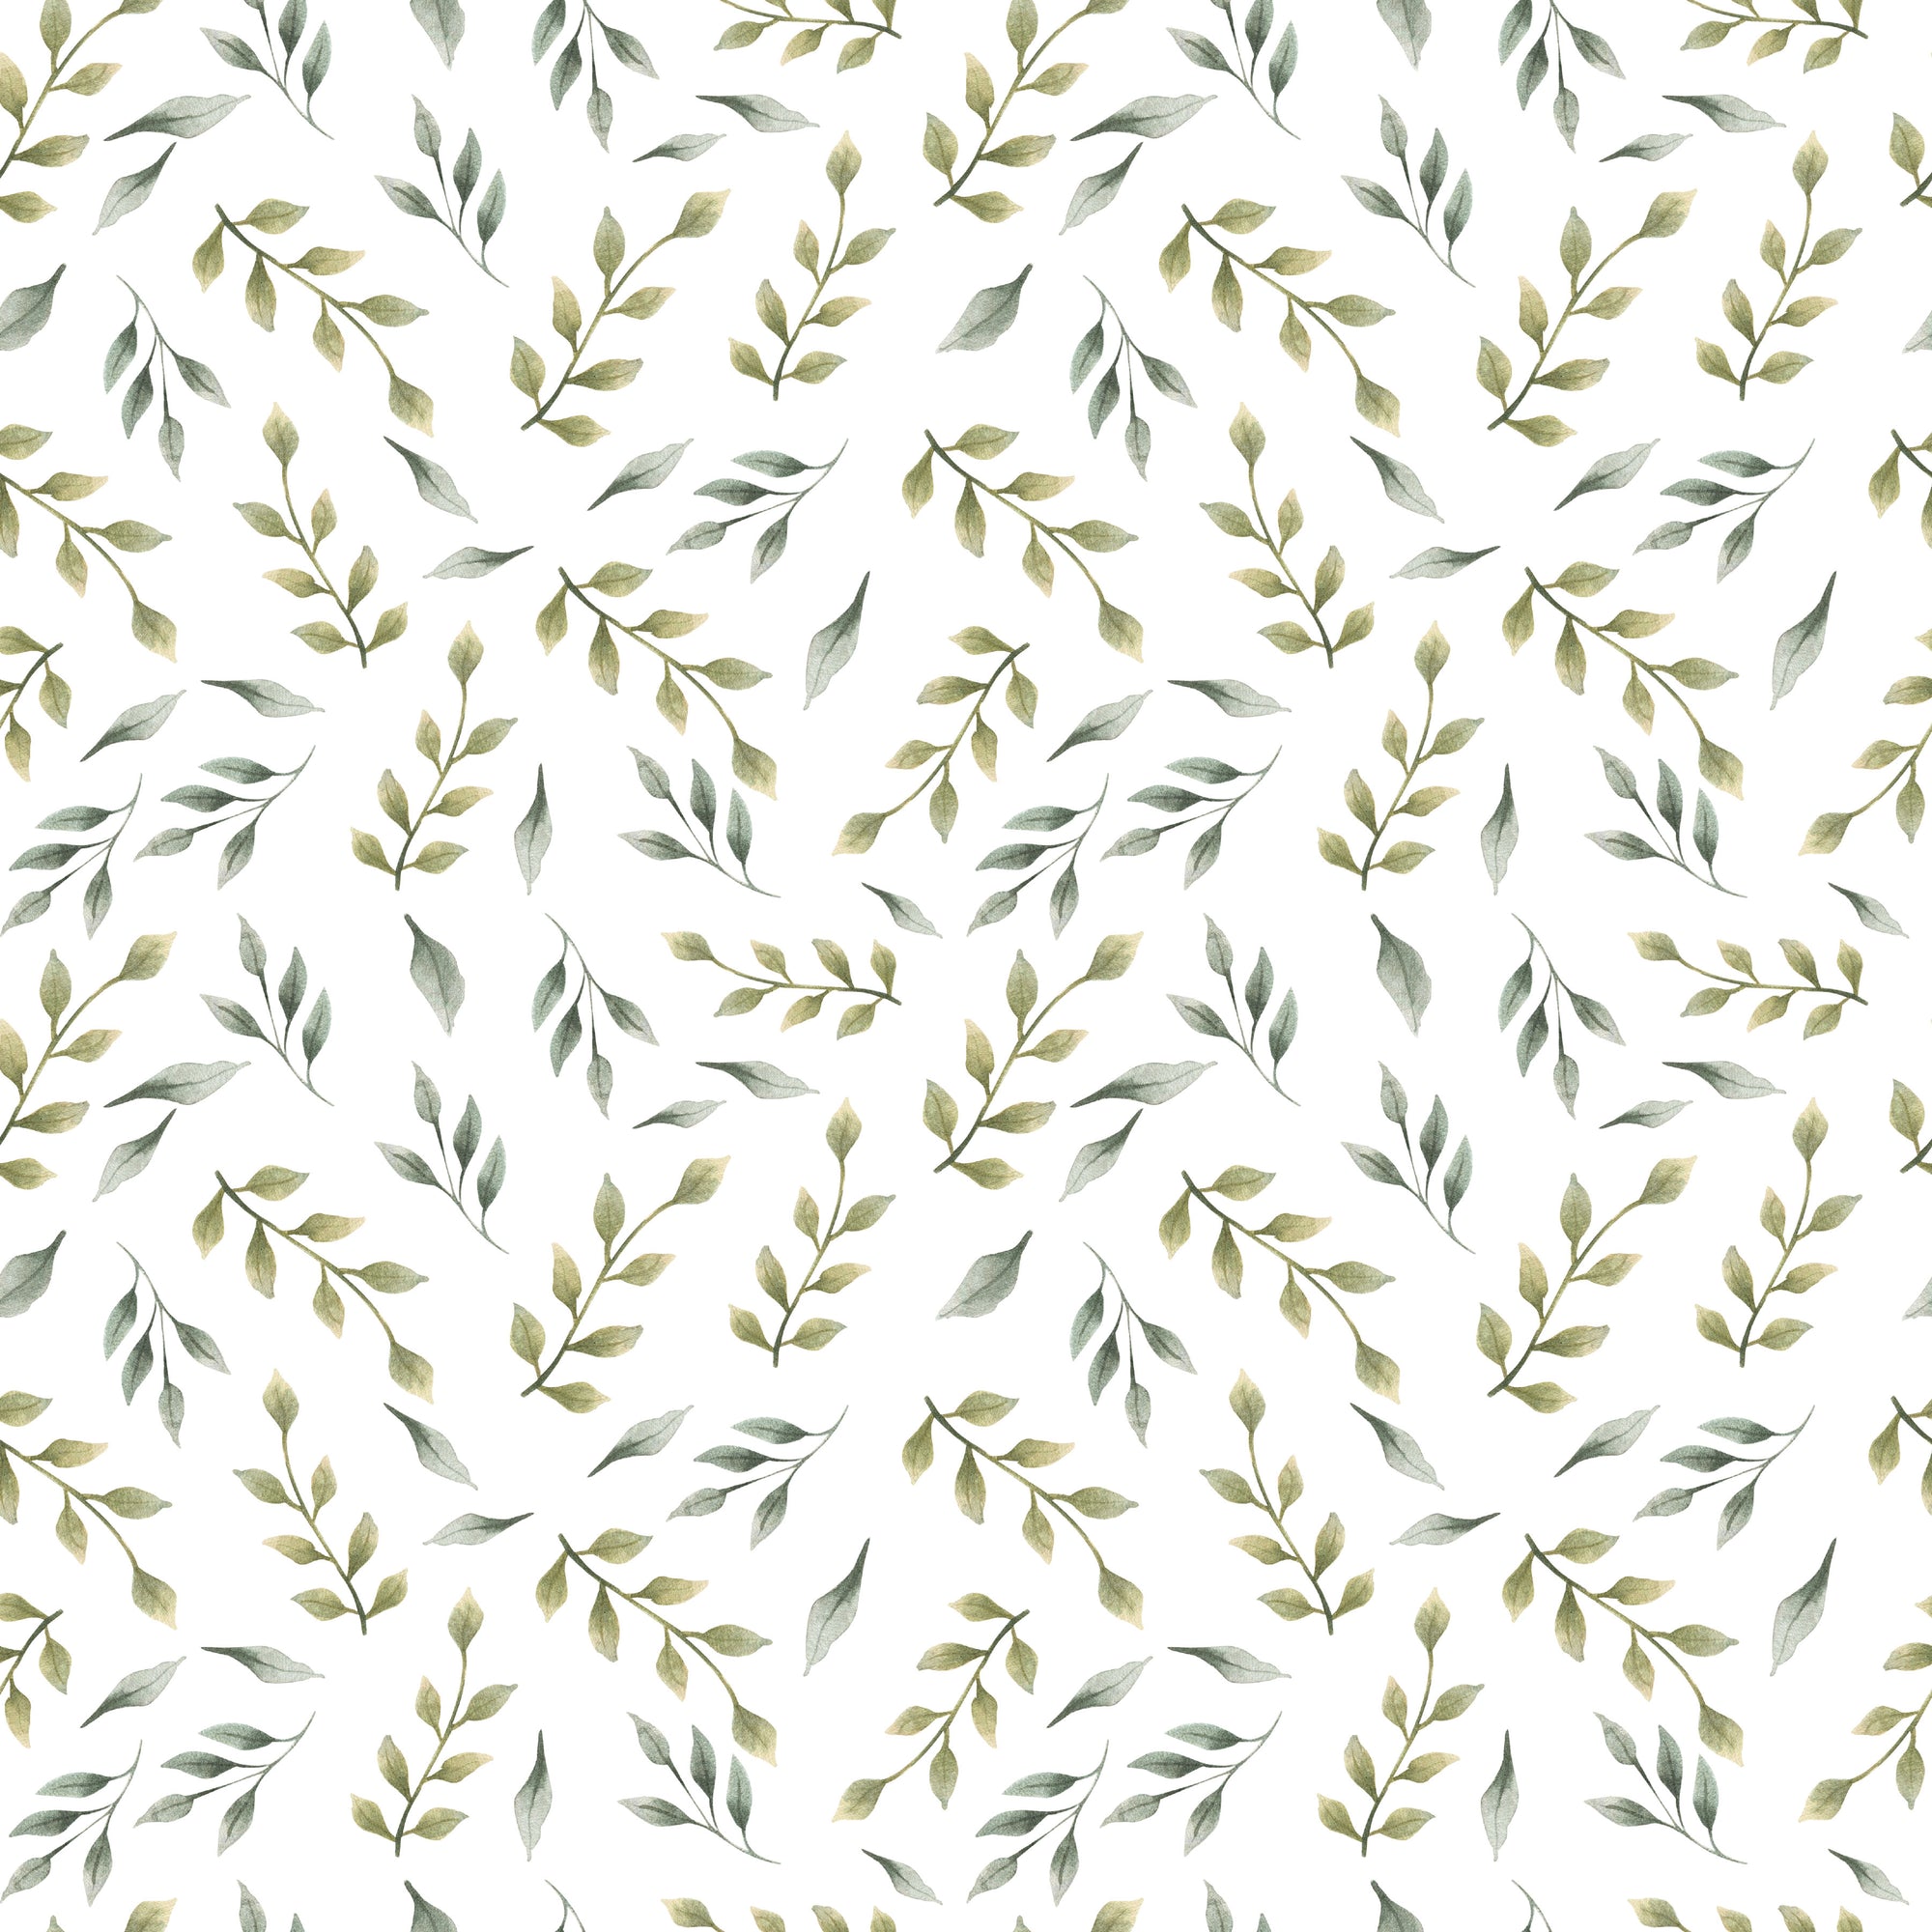 Leaves - Wrapping Paper